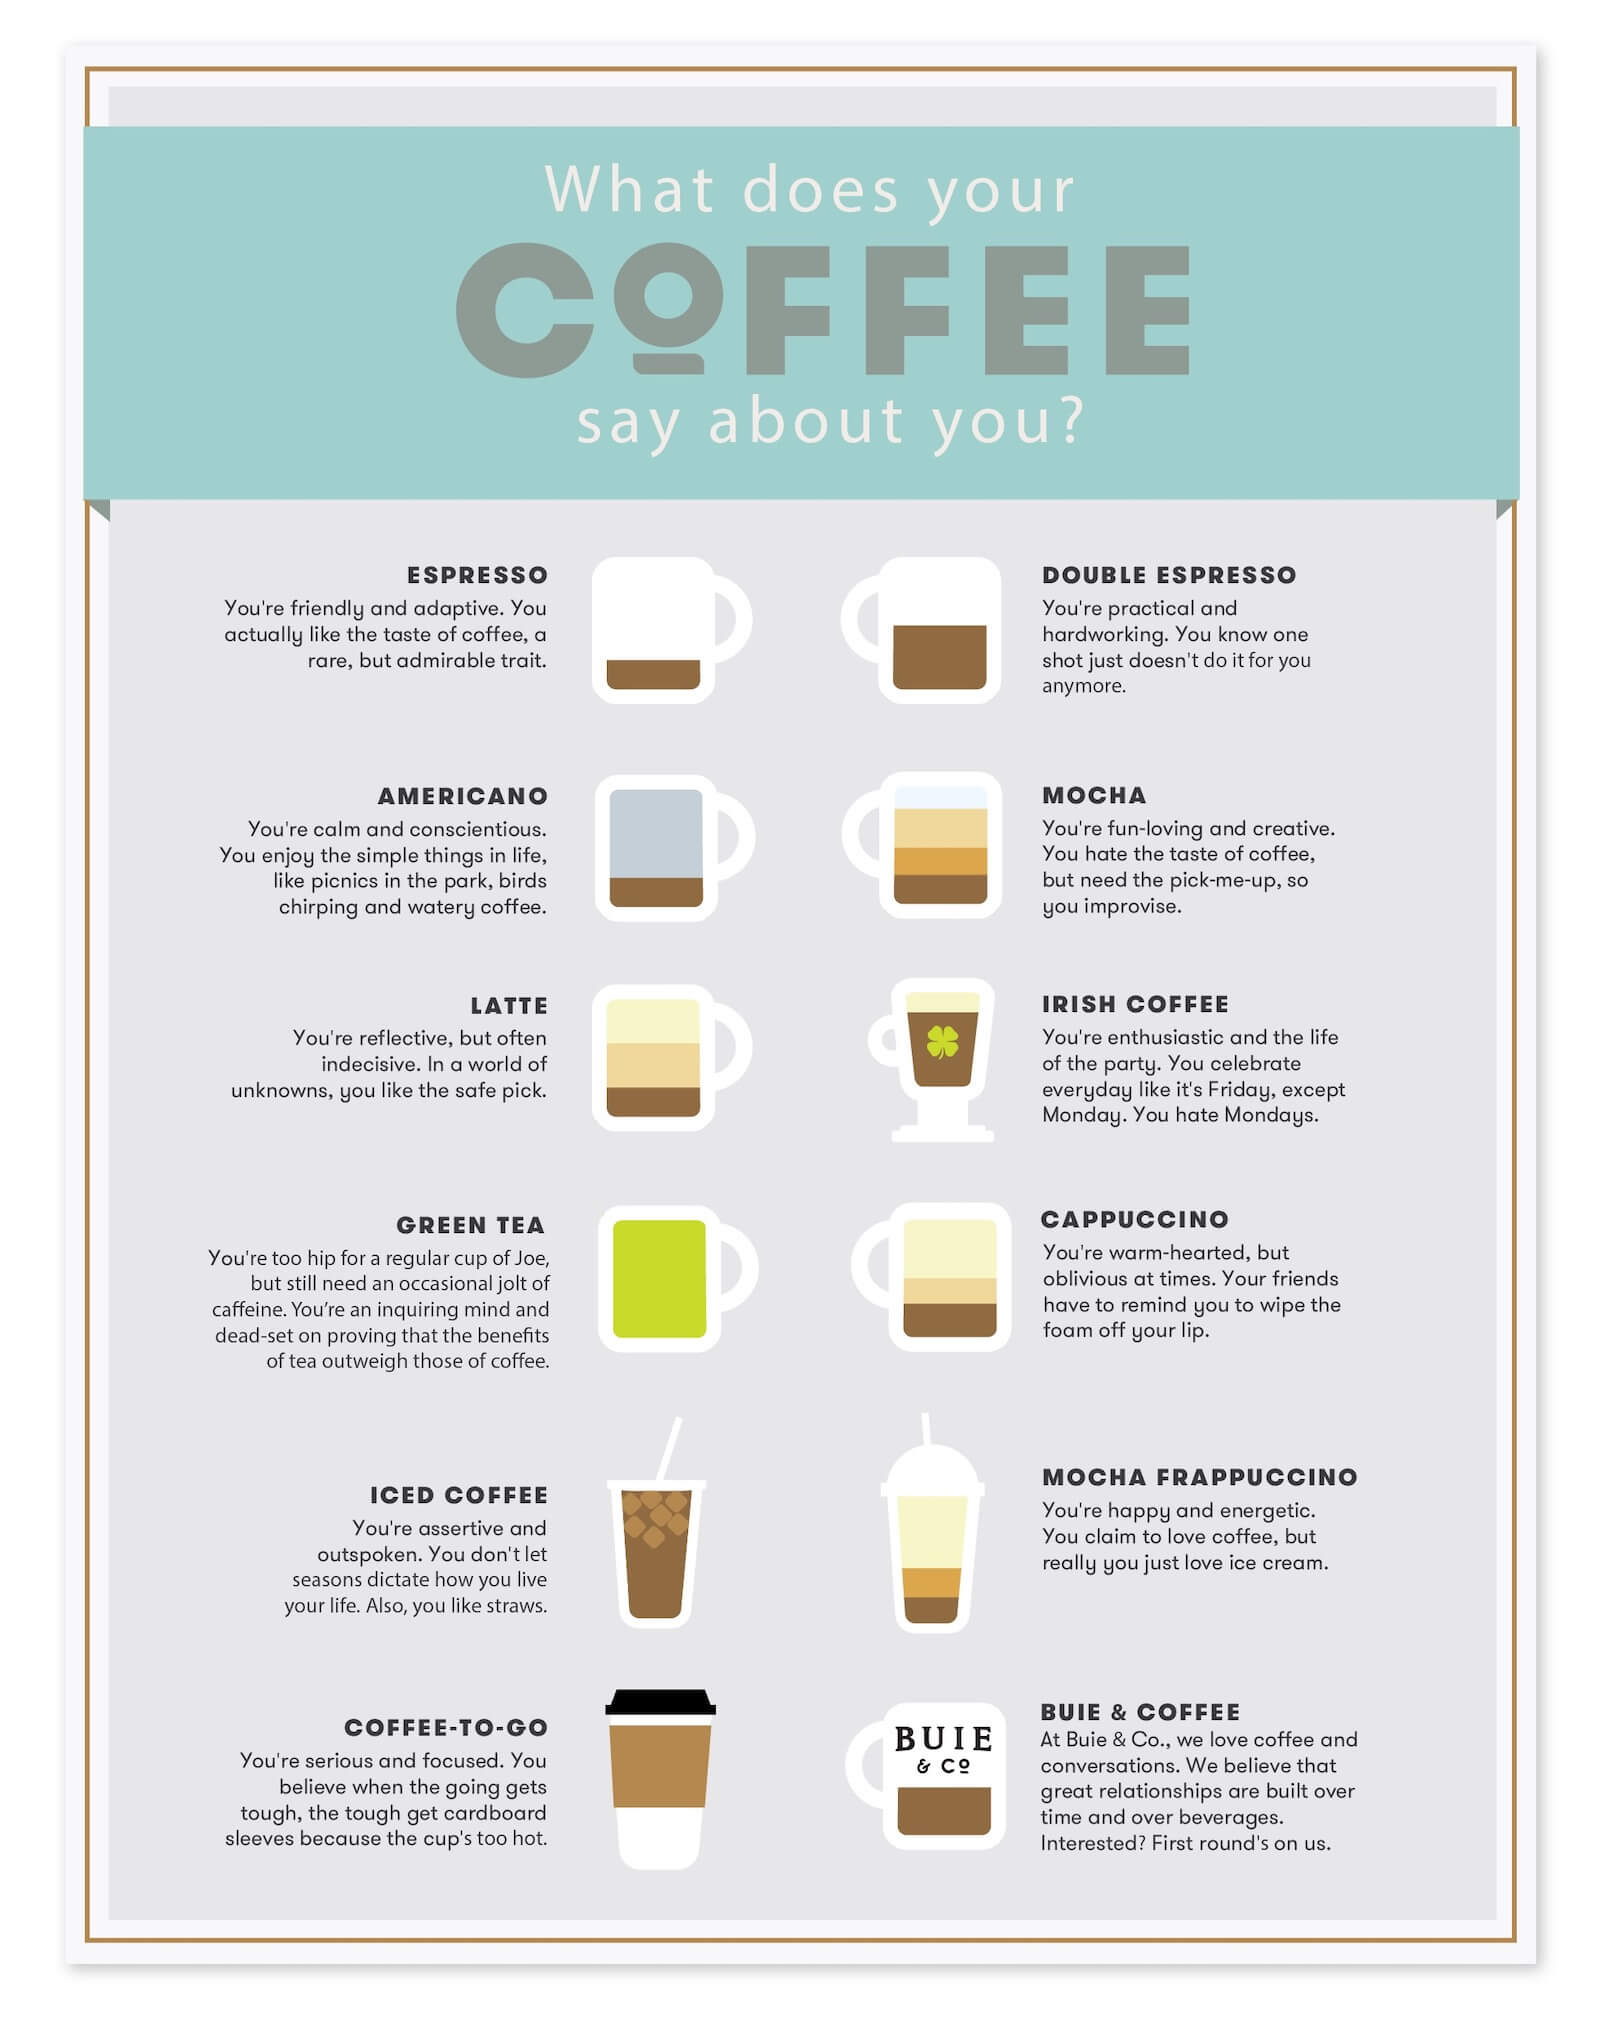 Buie and Company coffee poster design